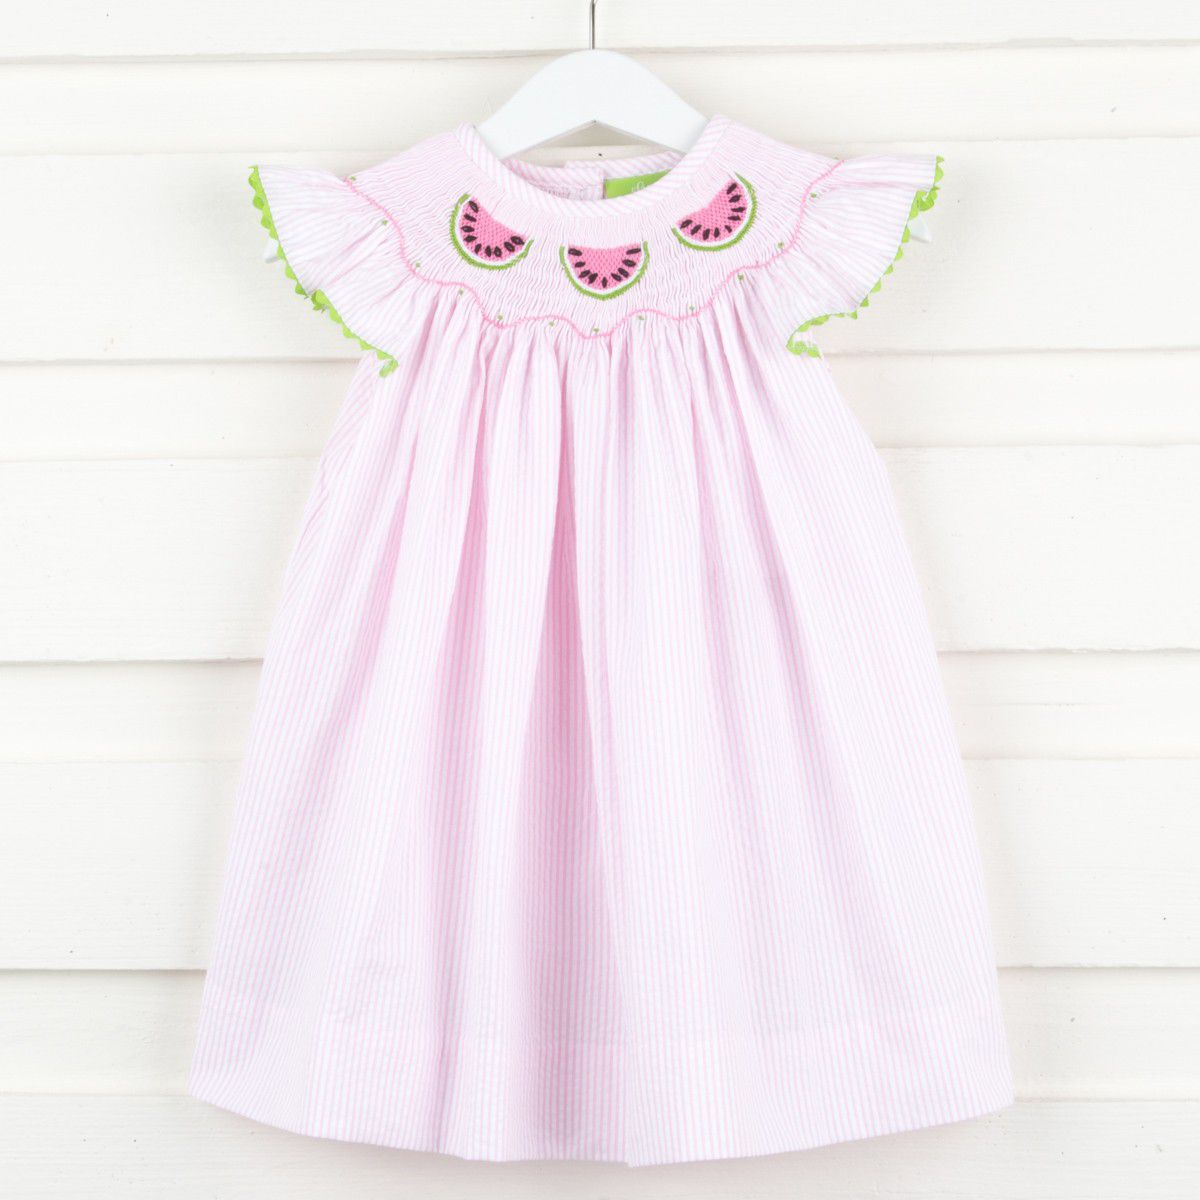 Our Favorite Smocked Birthday Dresses 